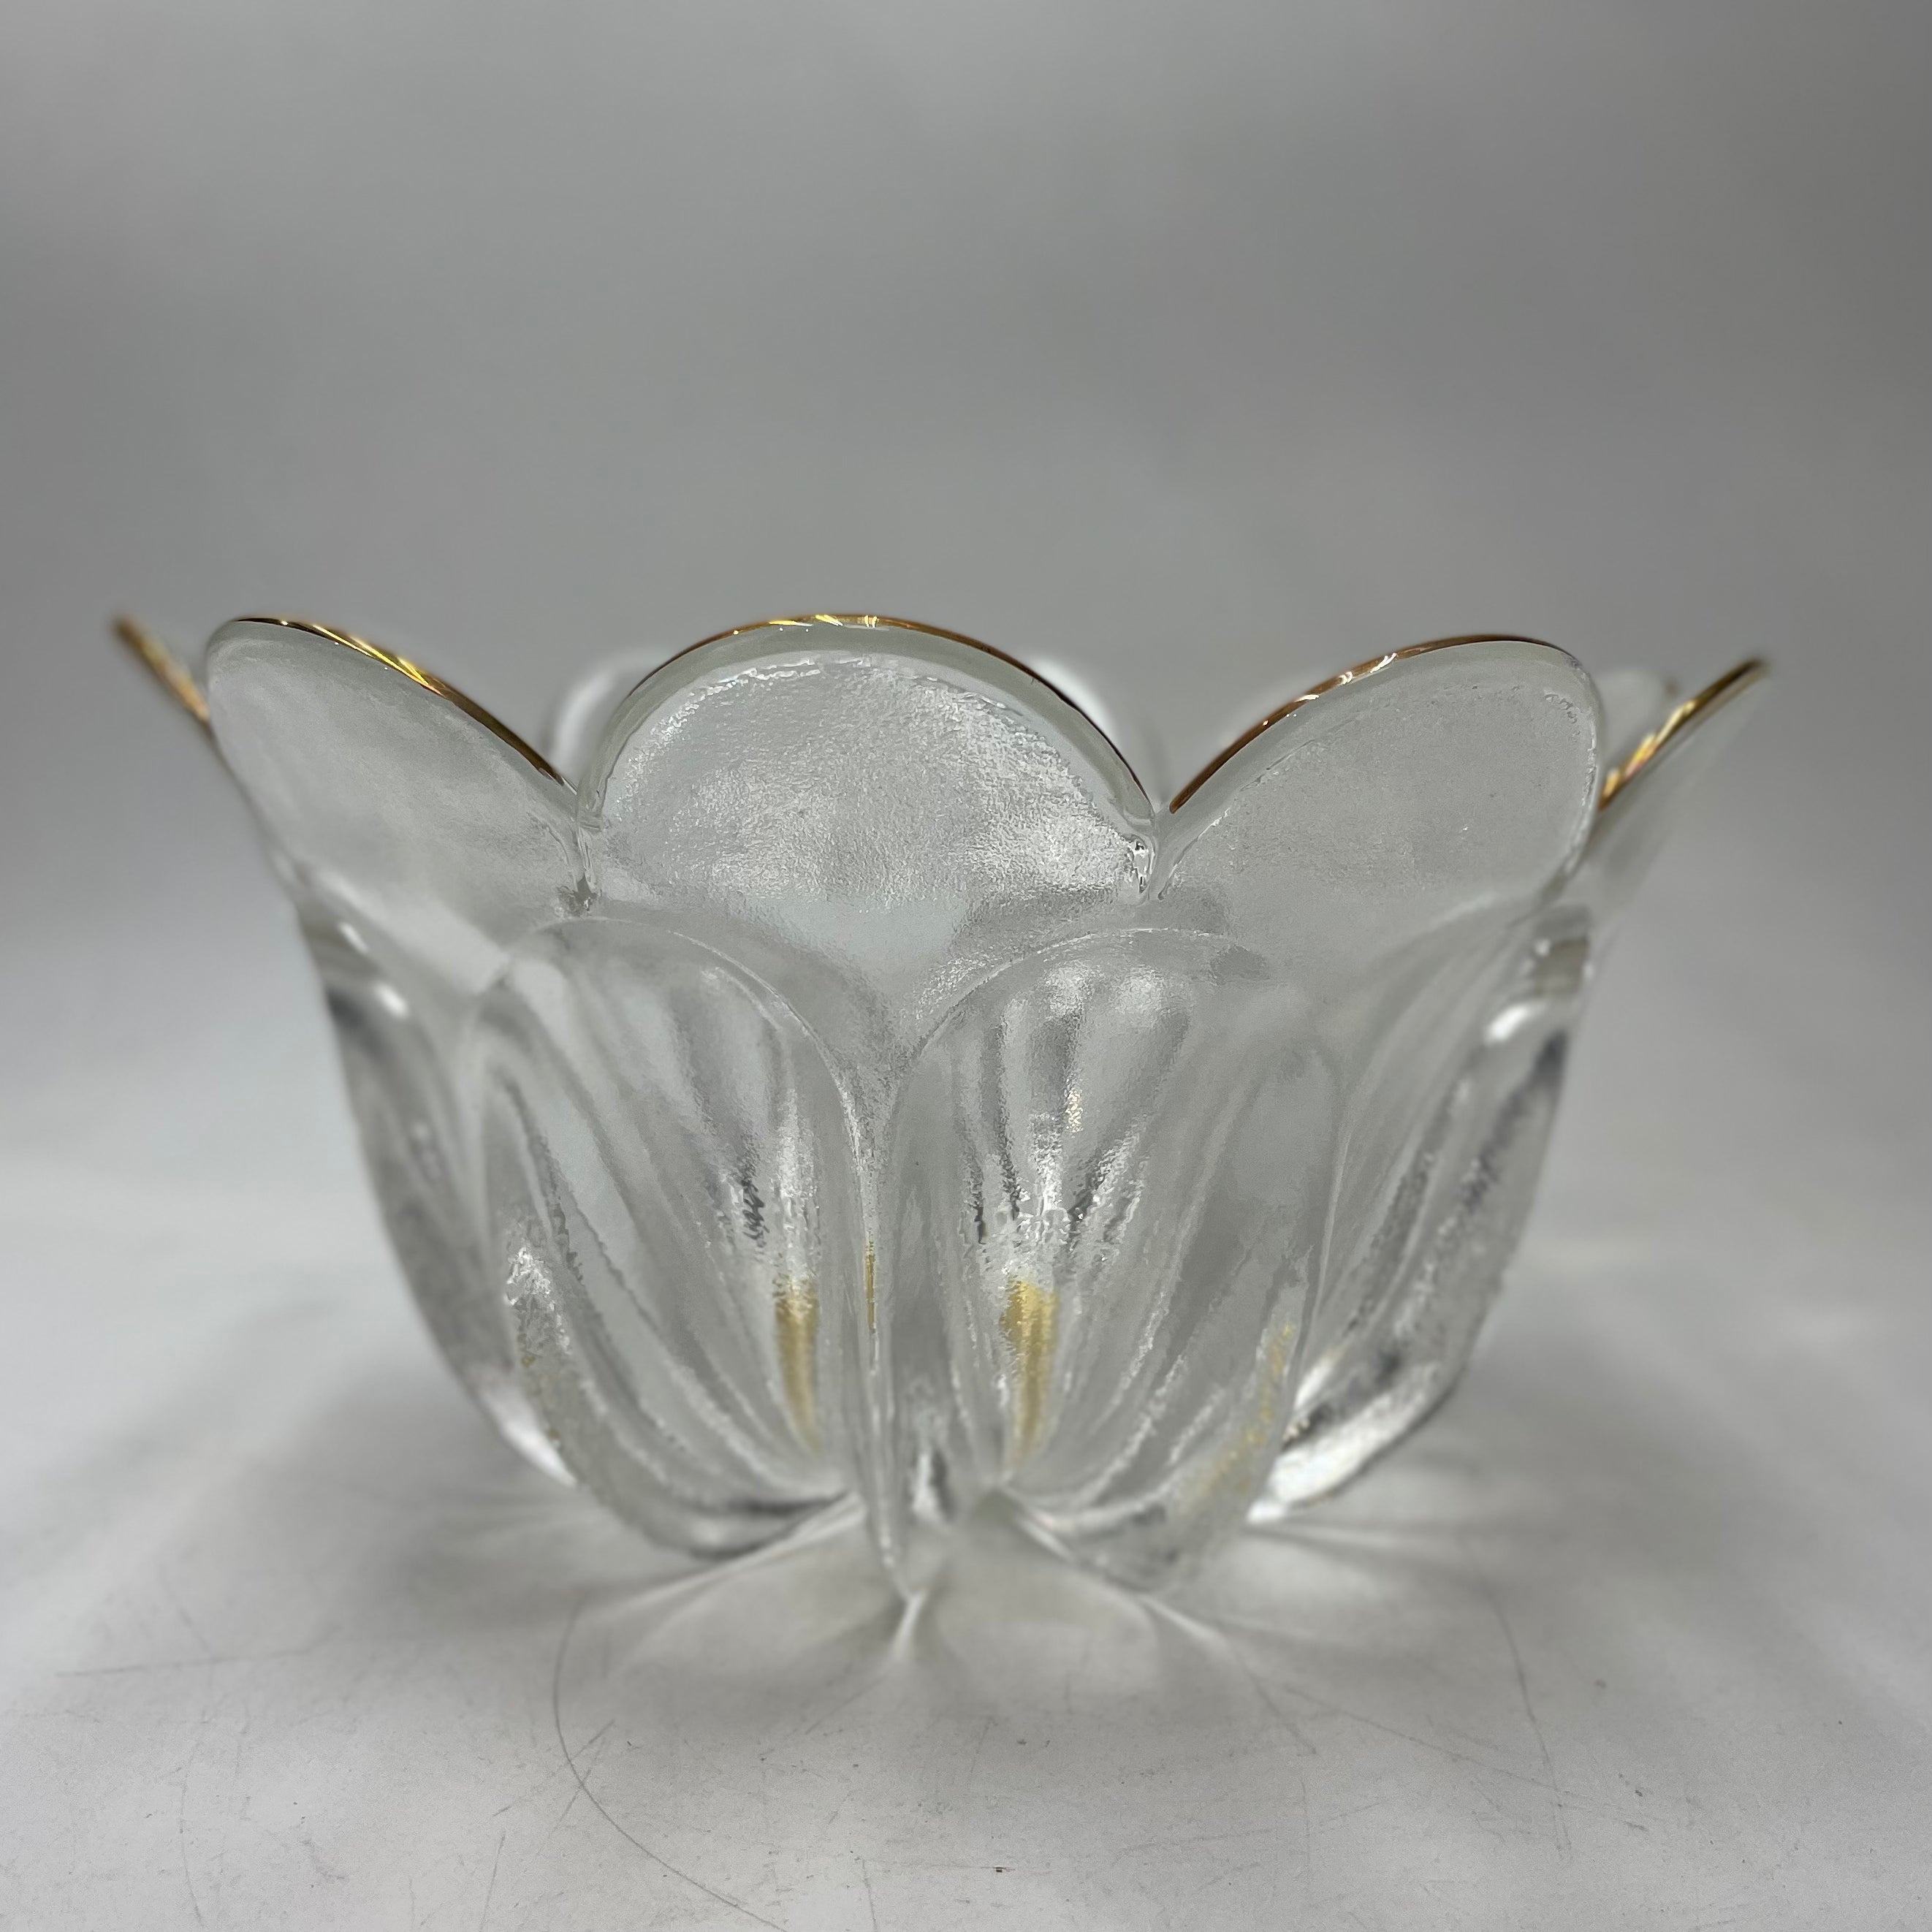 Walther Glas German Crystal Bowl with 24K Gold Rim